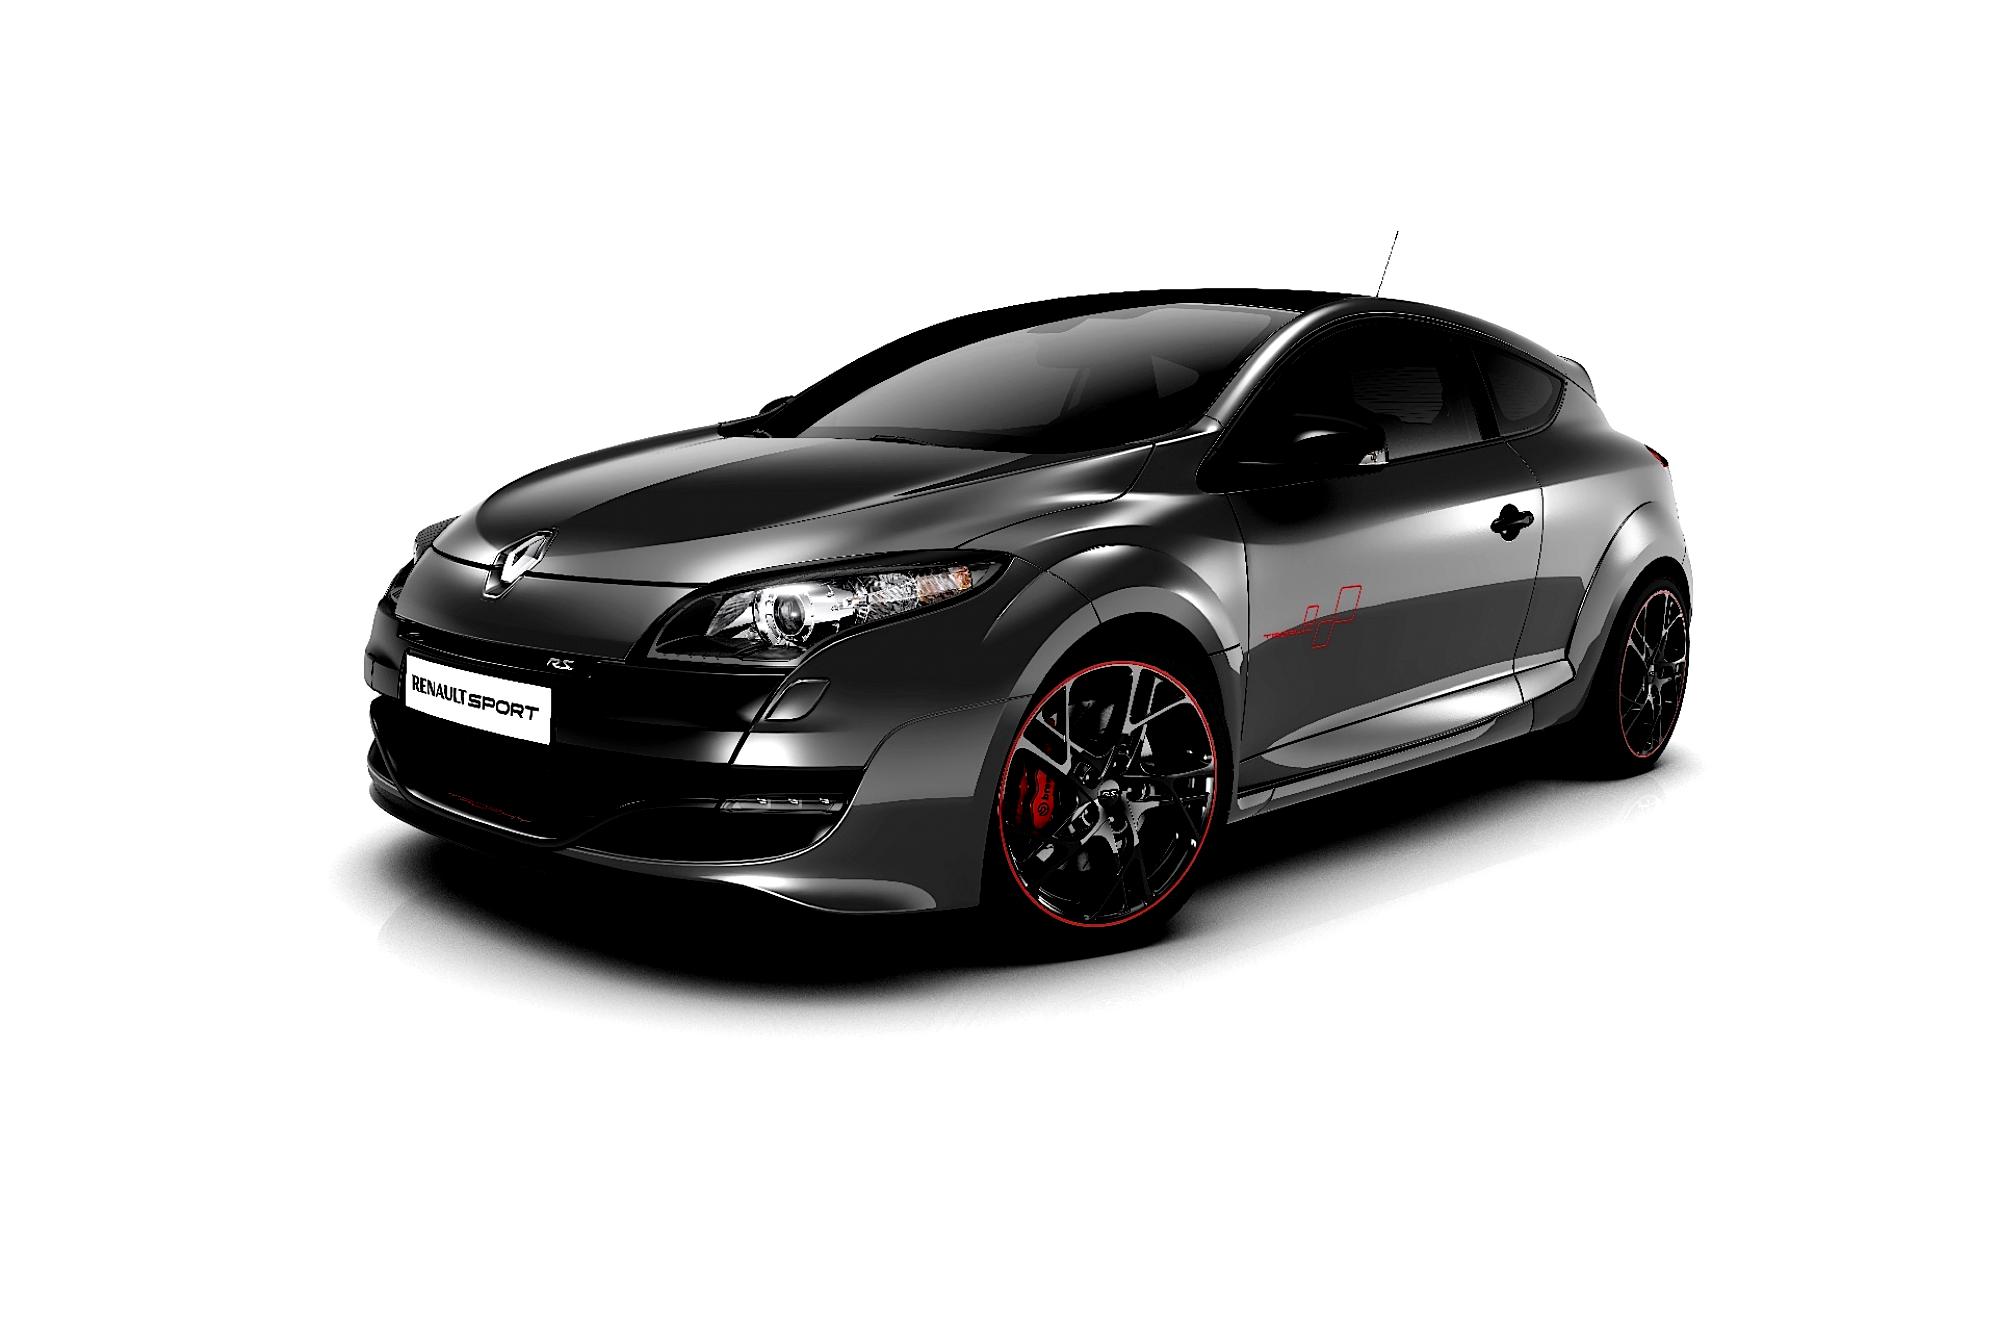 Renault Megane RS Coupe 2009 #36